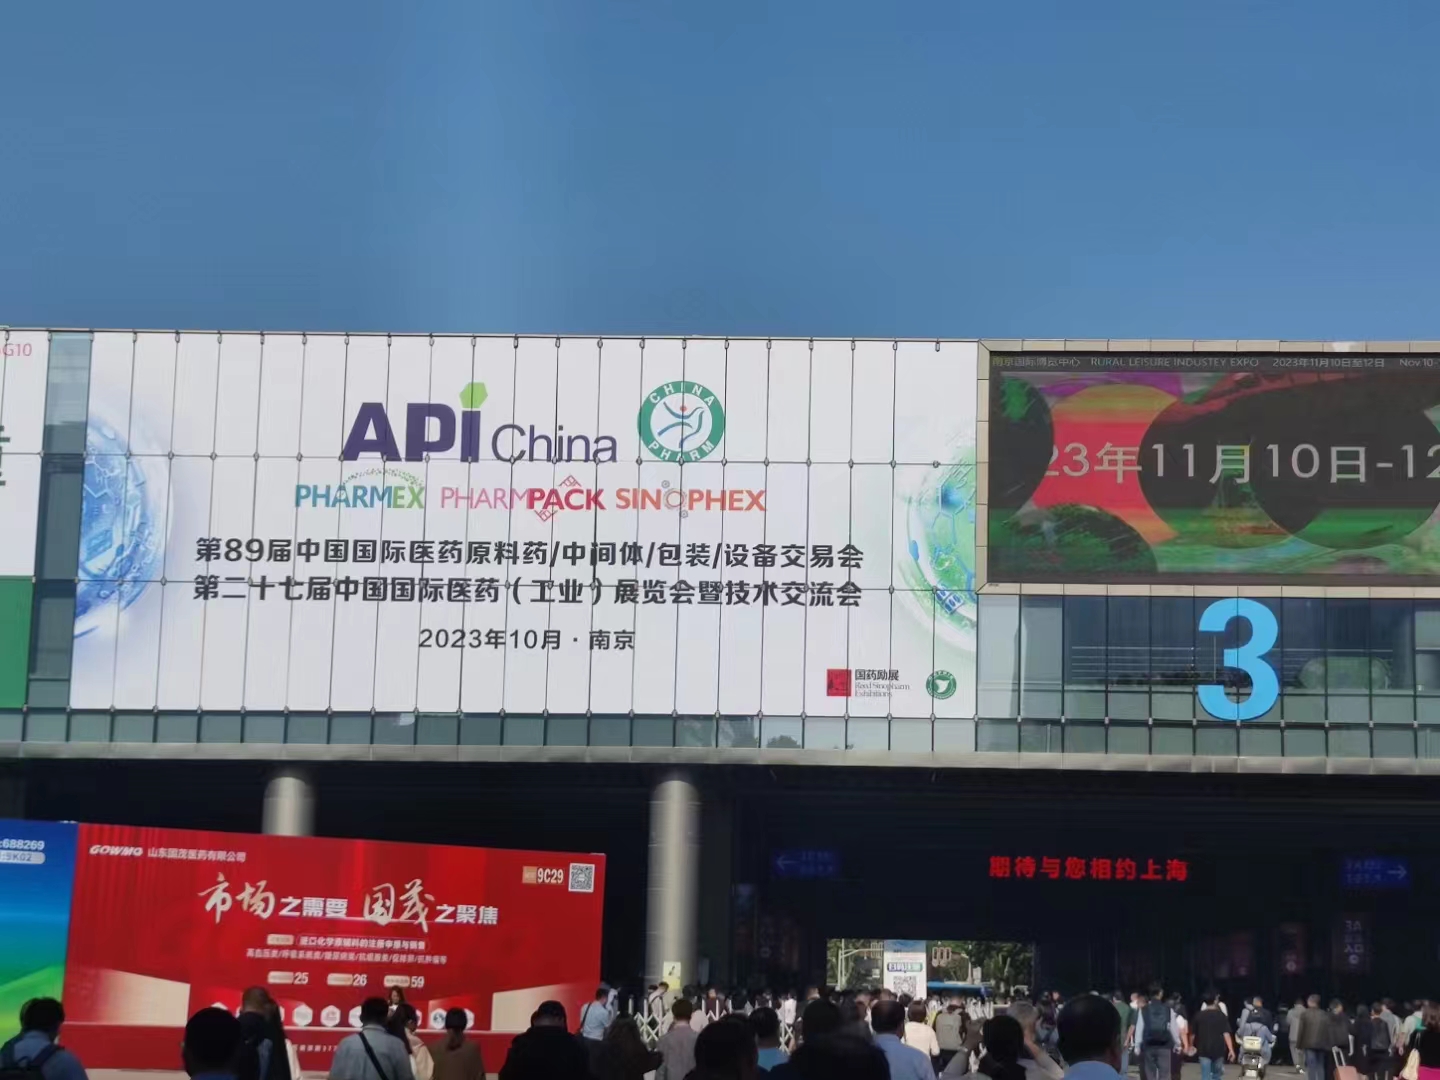 We attend API China for capsule blister and tablets blister